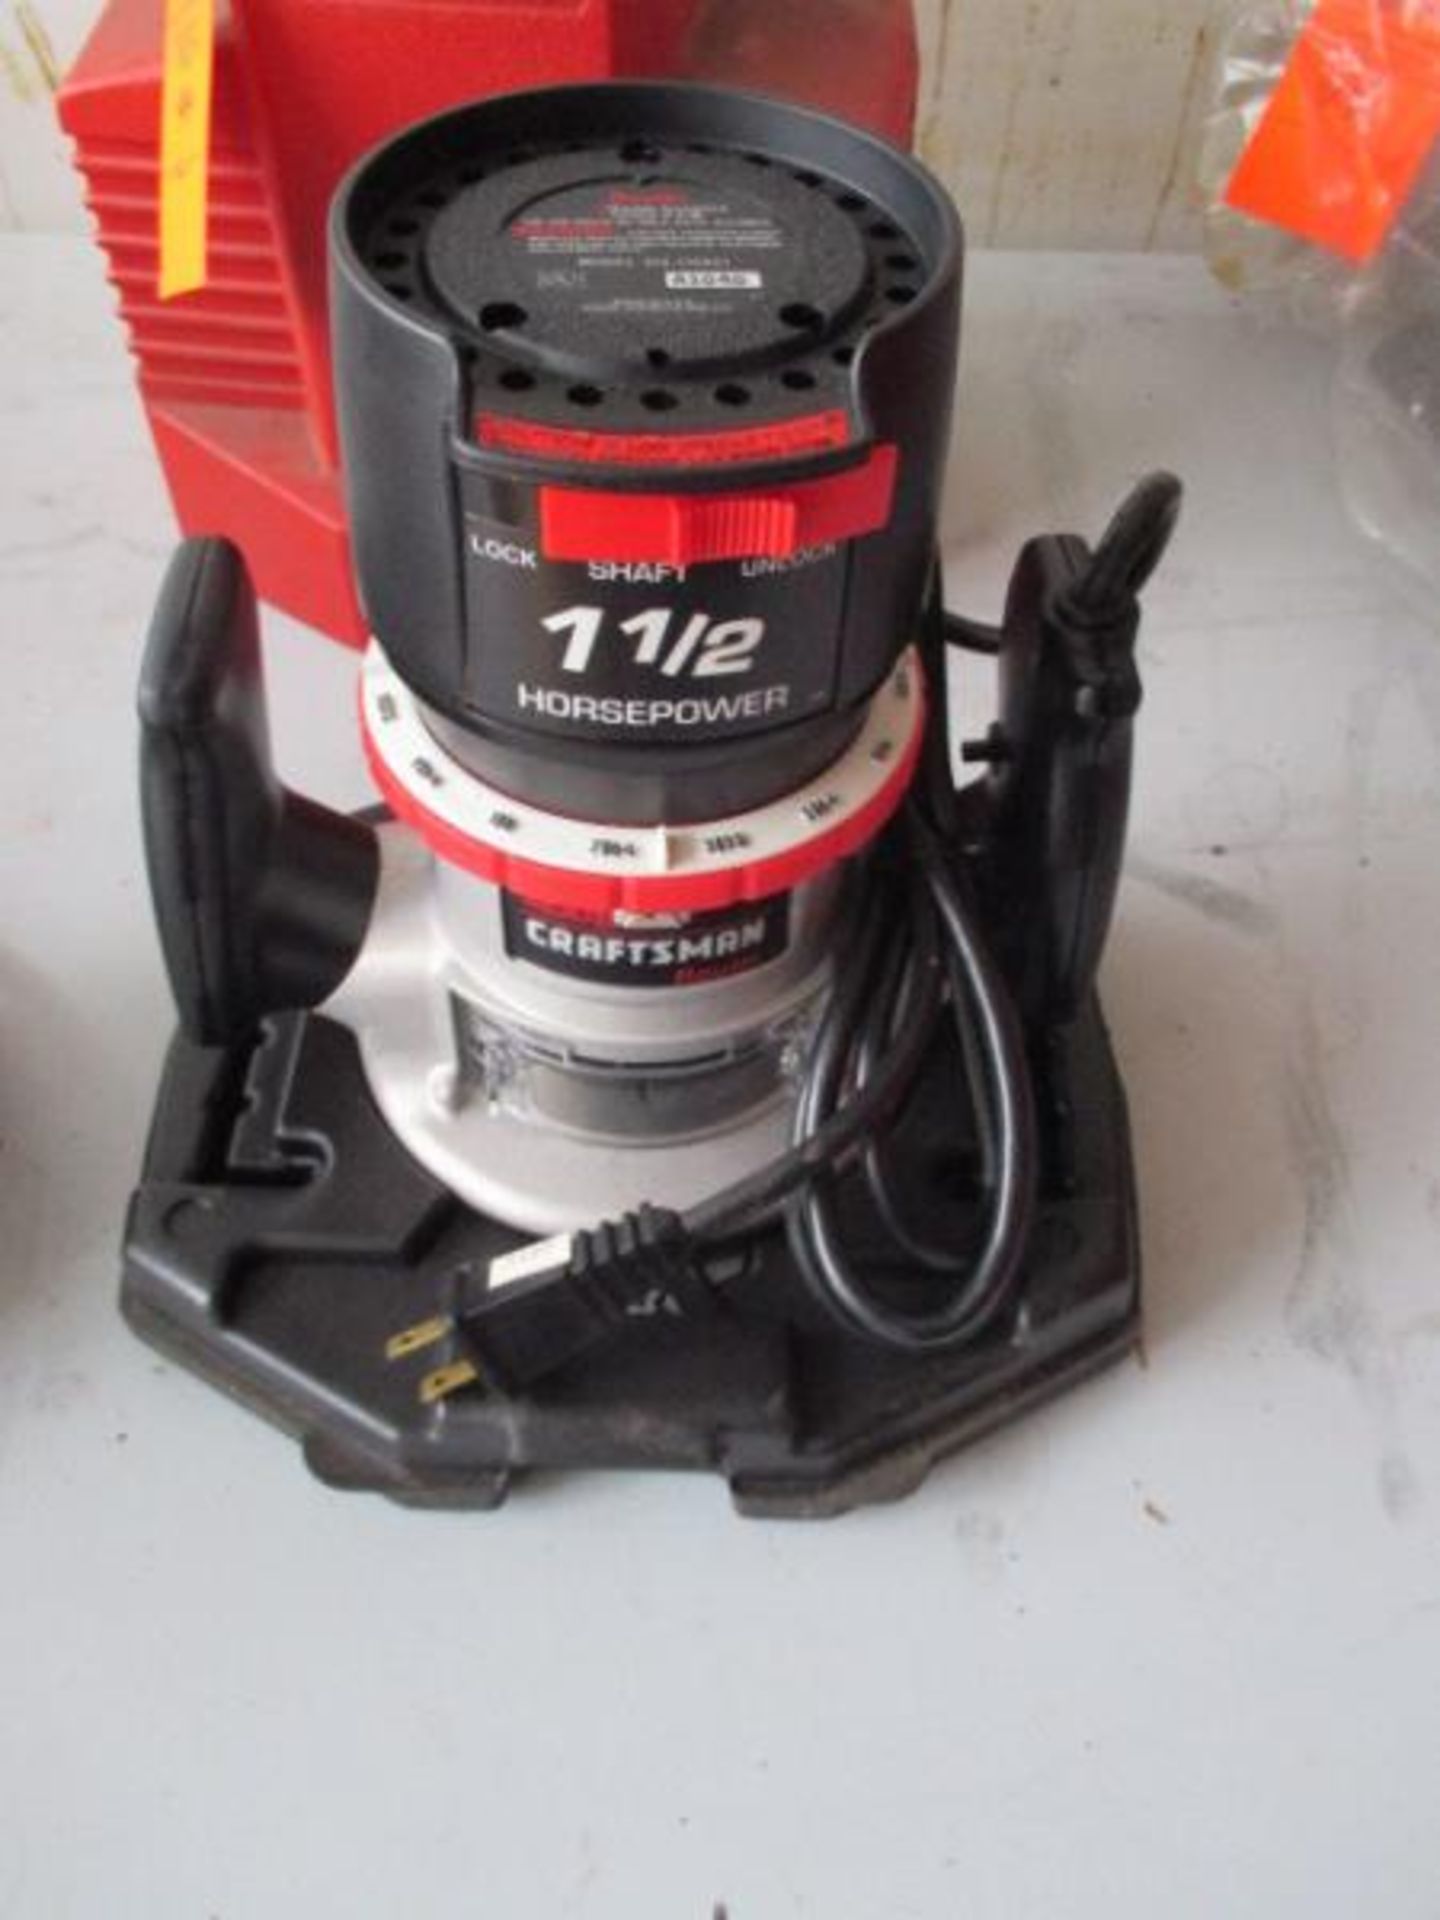 Craftsman Router, Model :315-174921, Double Insulated, 2500 R.P.M. w/ Case, (1) Black & Decker 7 1/ - Image 3 of 6